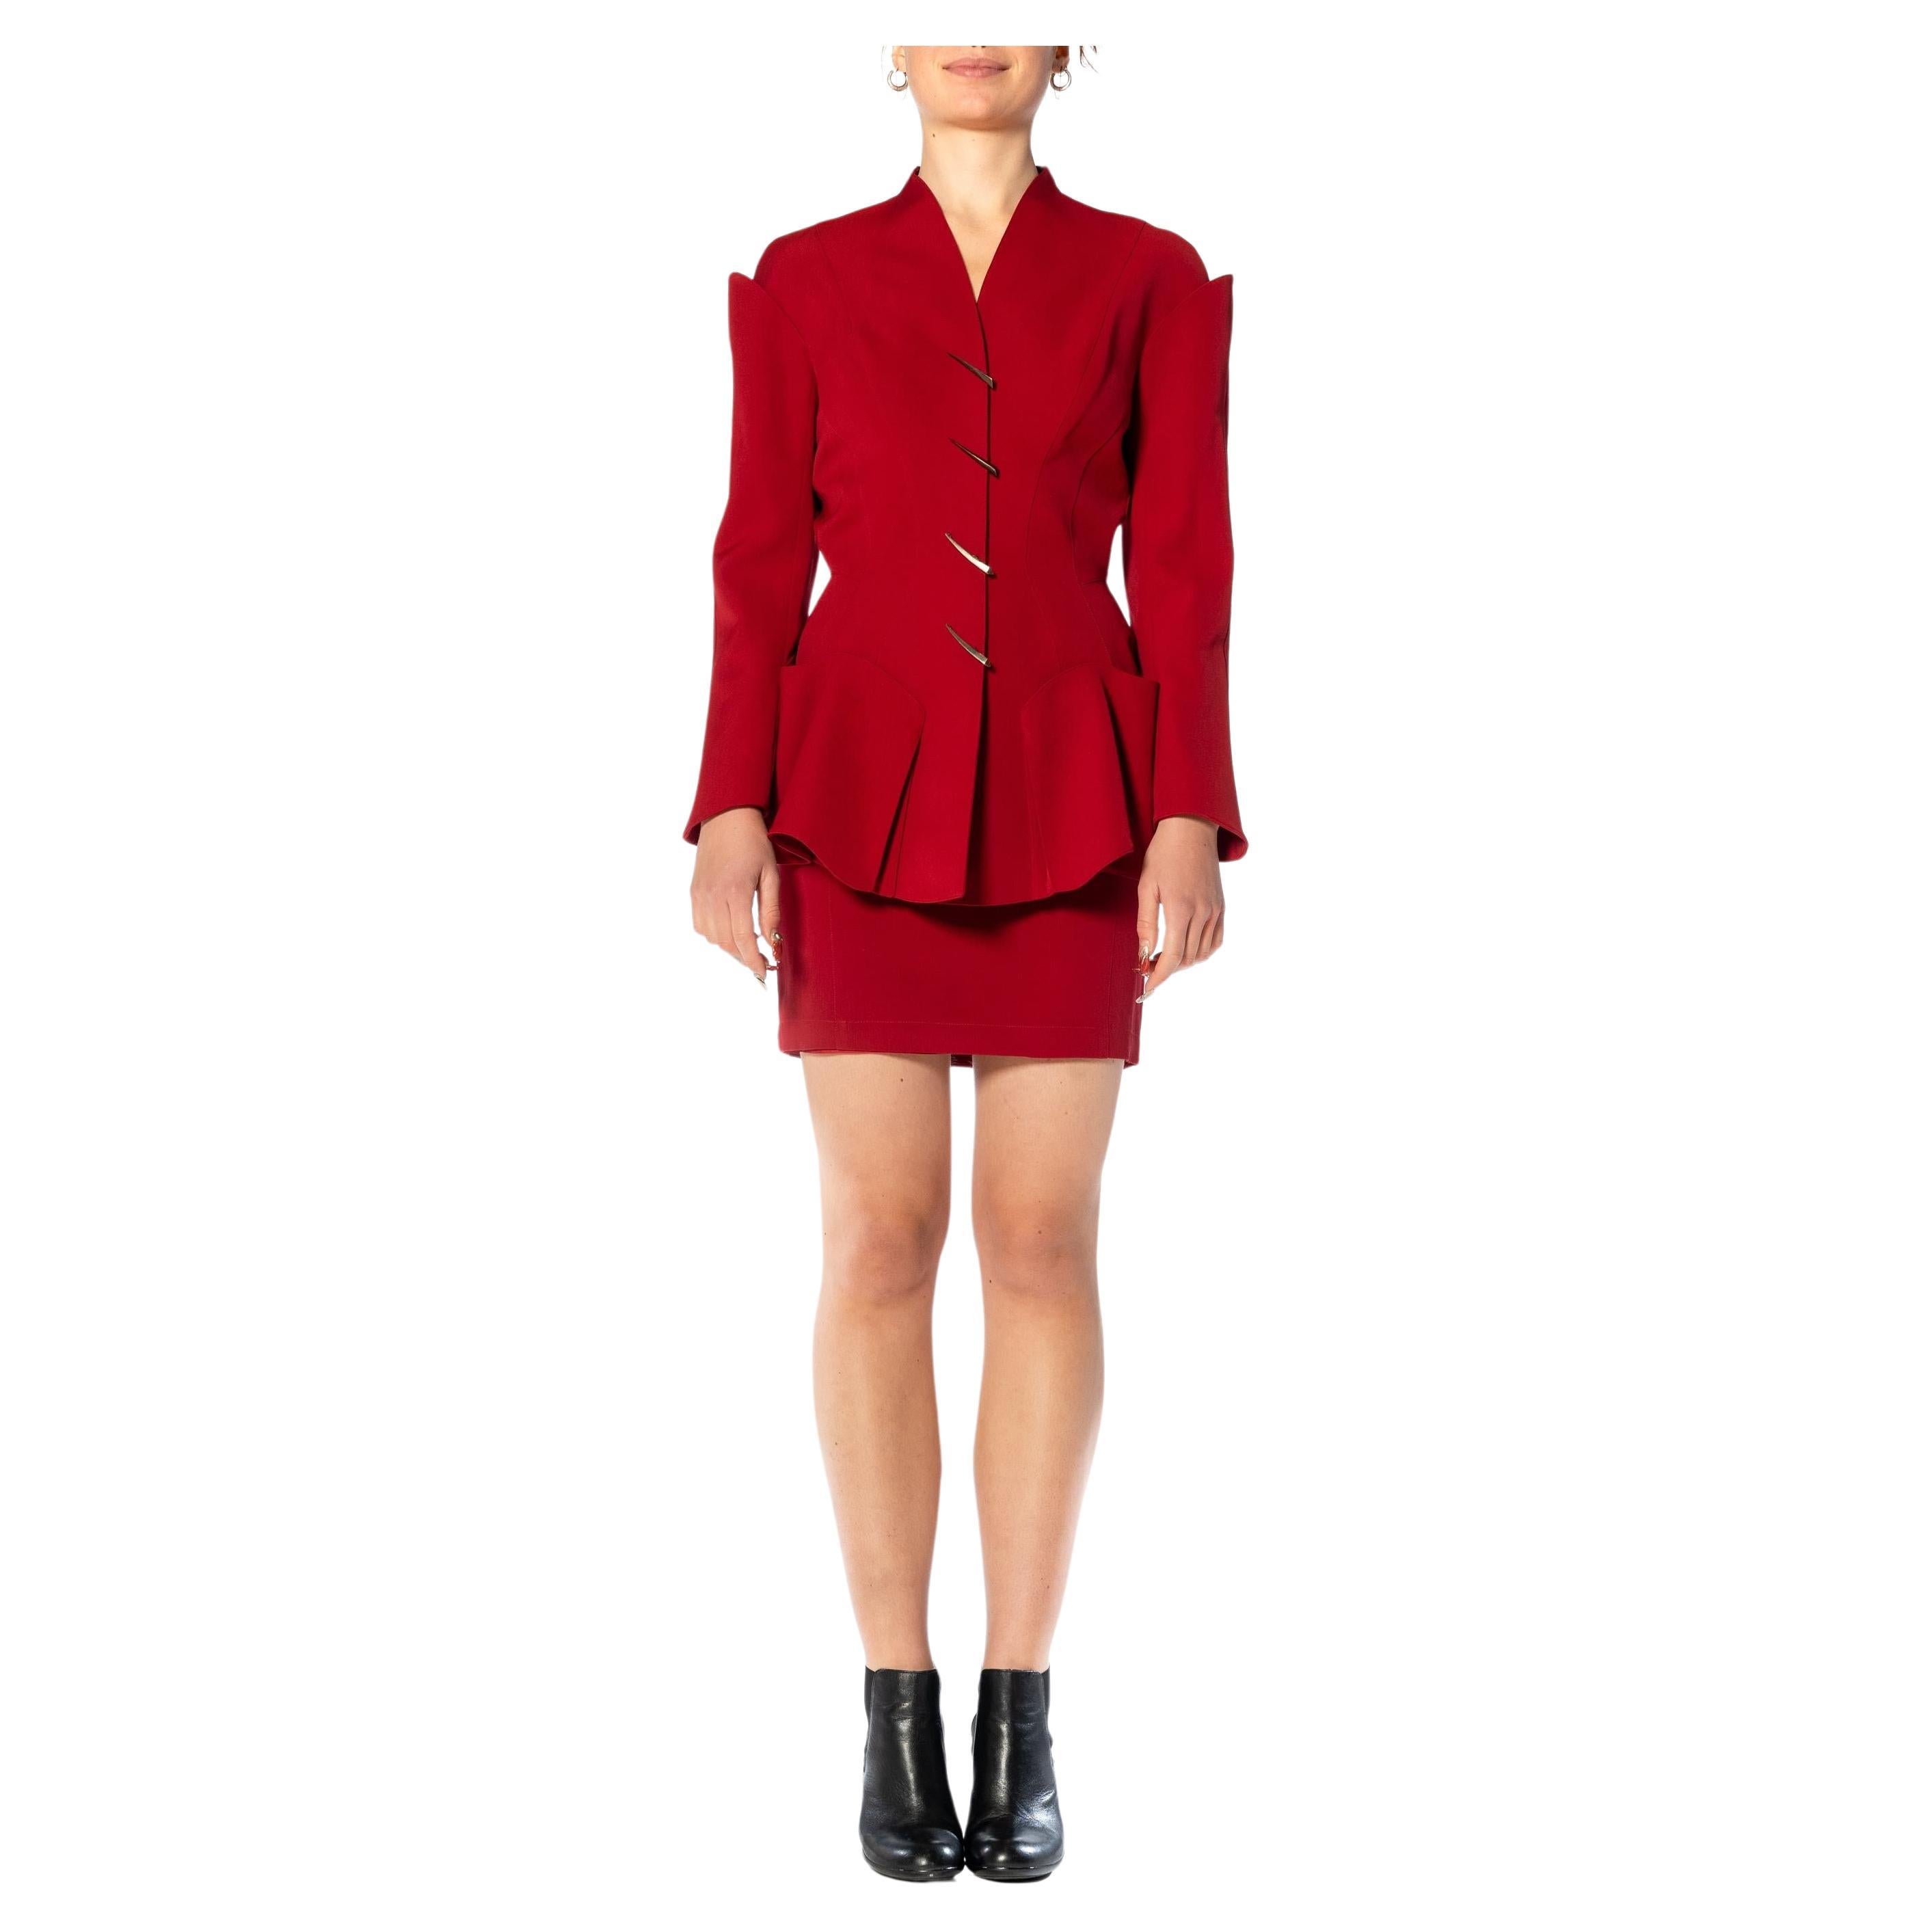 1990S THIERRY MUGLER Red Wool Skirt Suit With Peplum In Excellent Condition For Sale In New York, NY